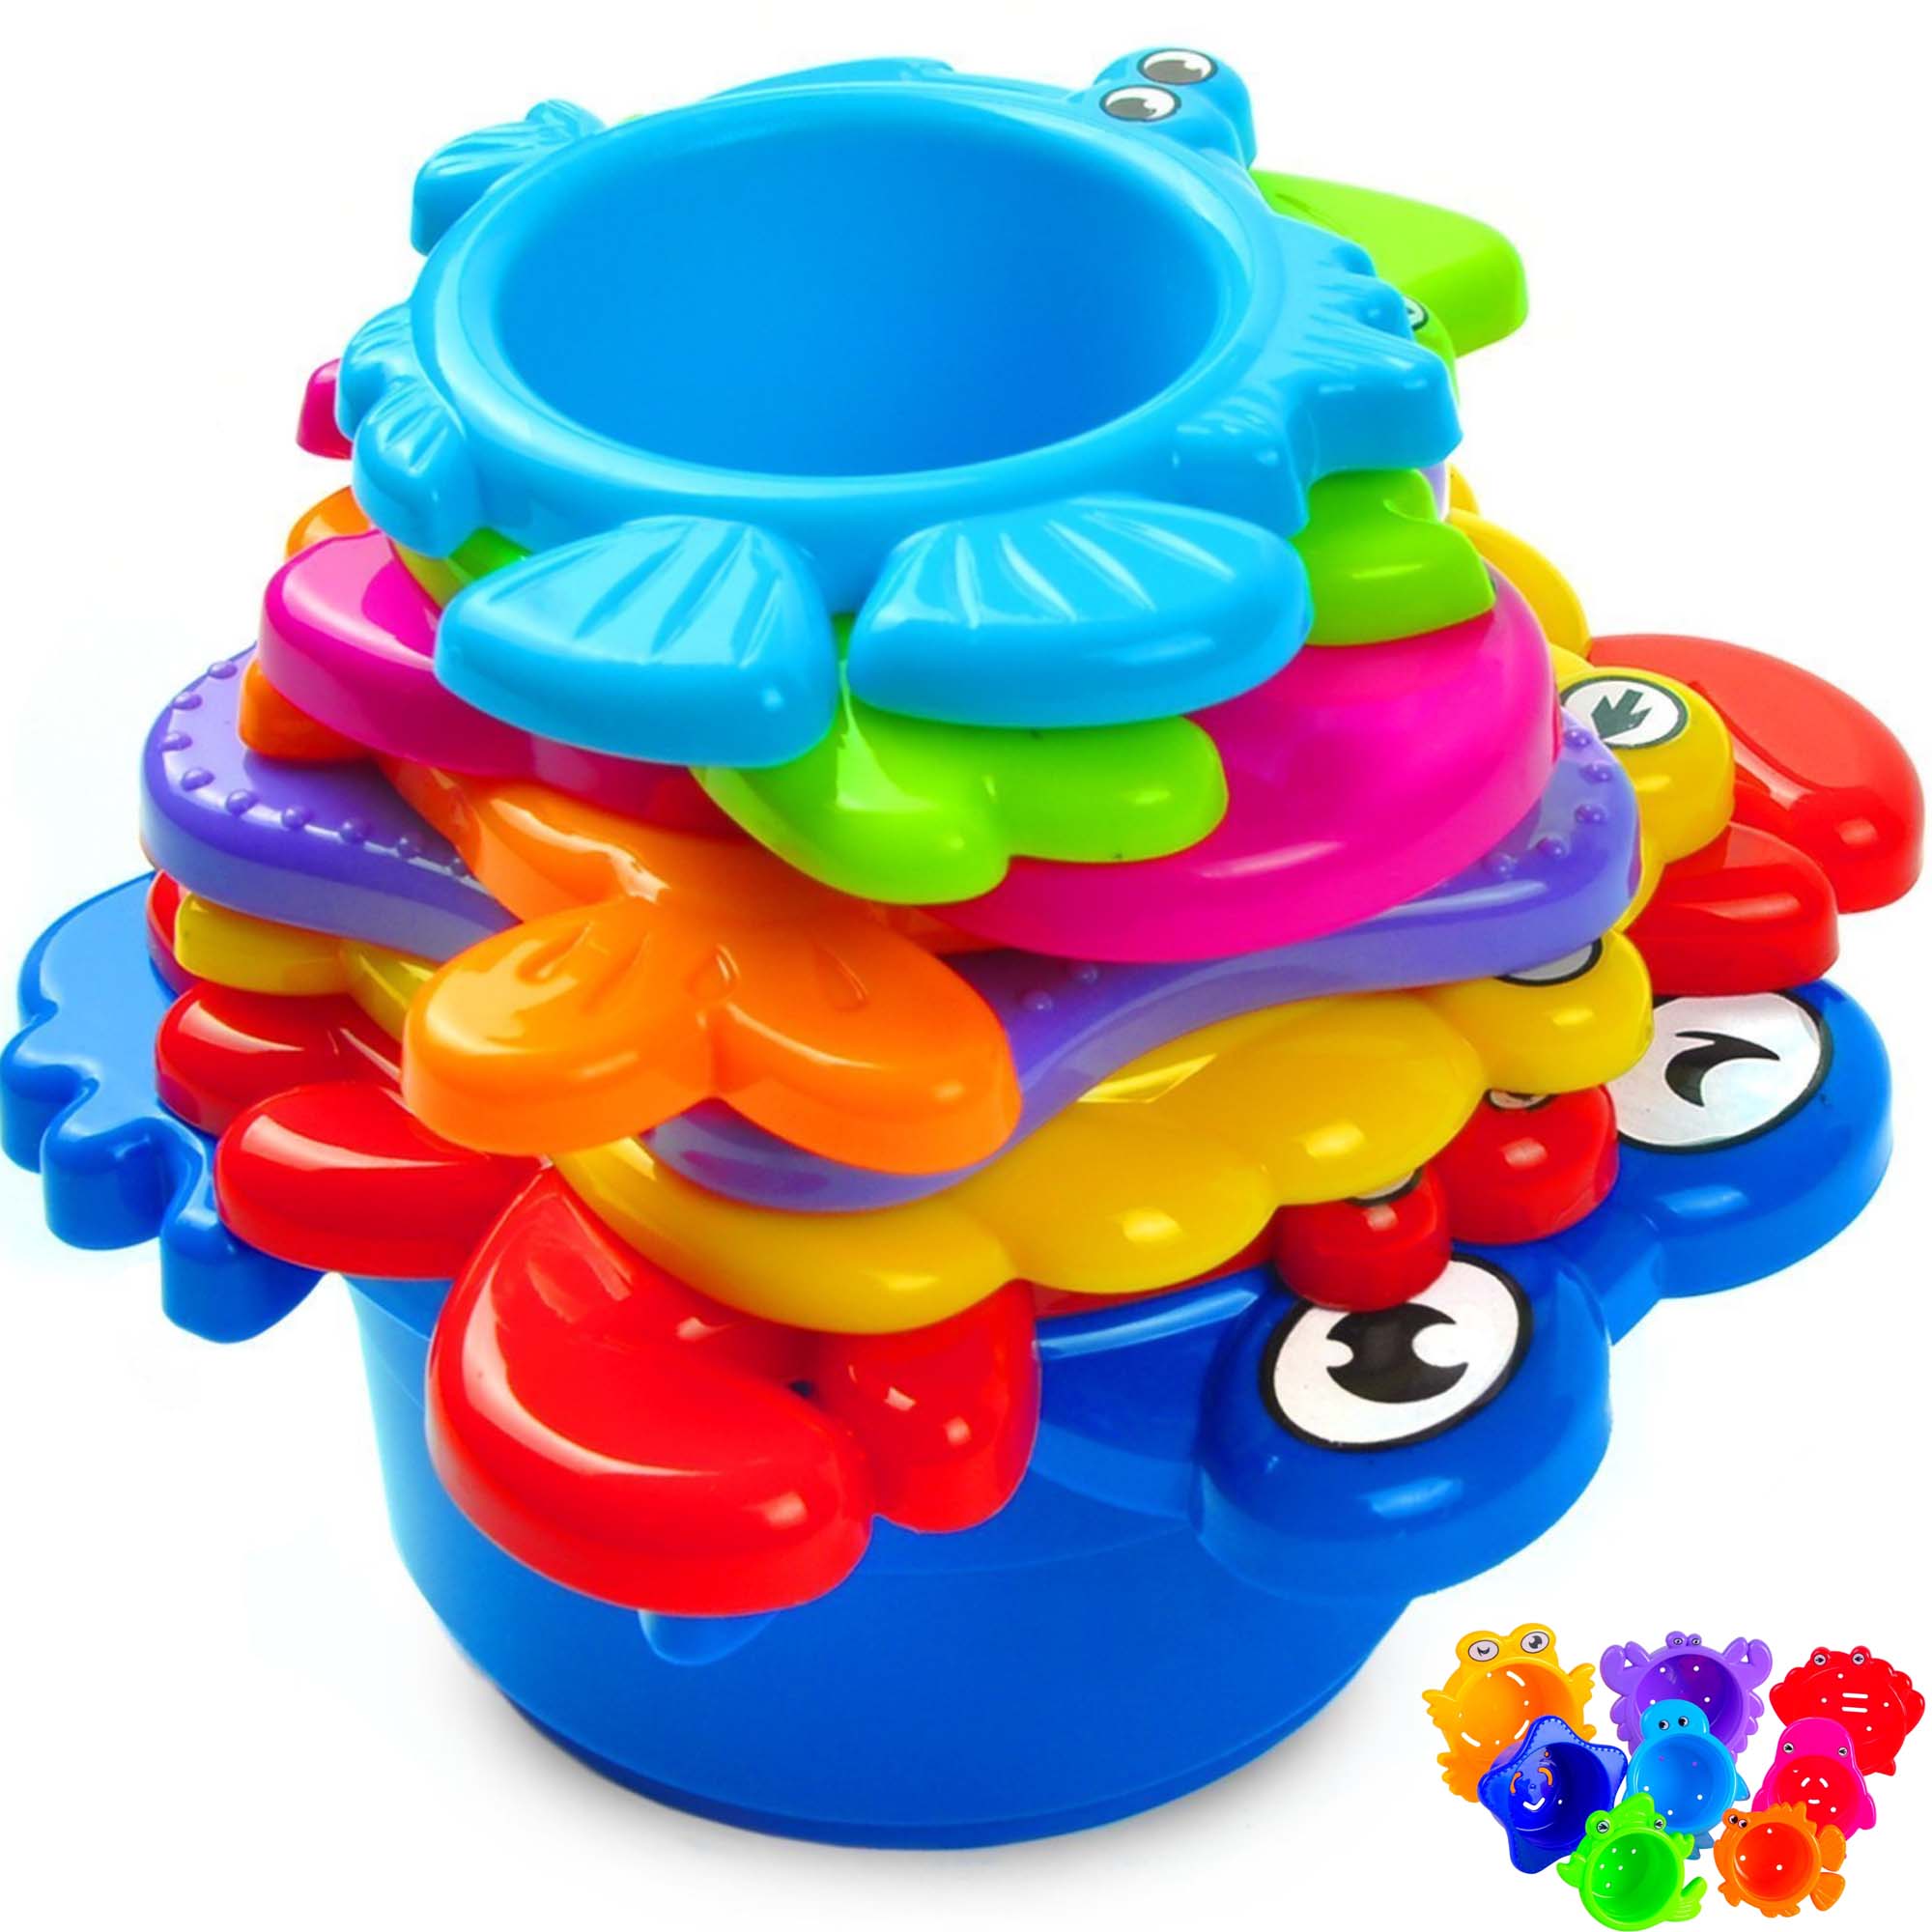 Extasticks Beautiful Colored Stacking Cups With Sea Animals image number null